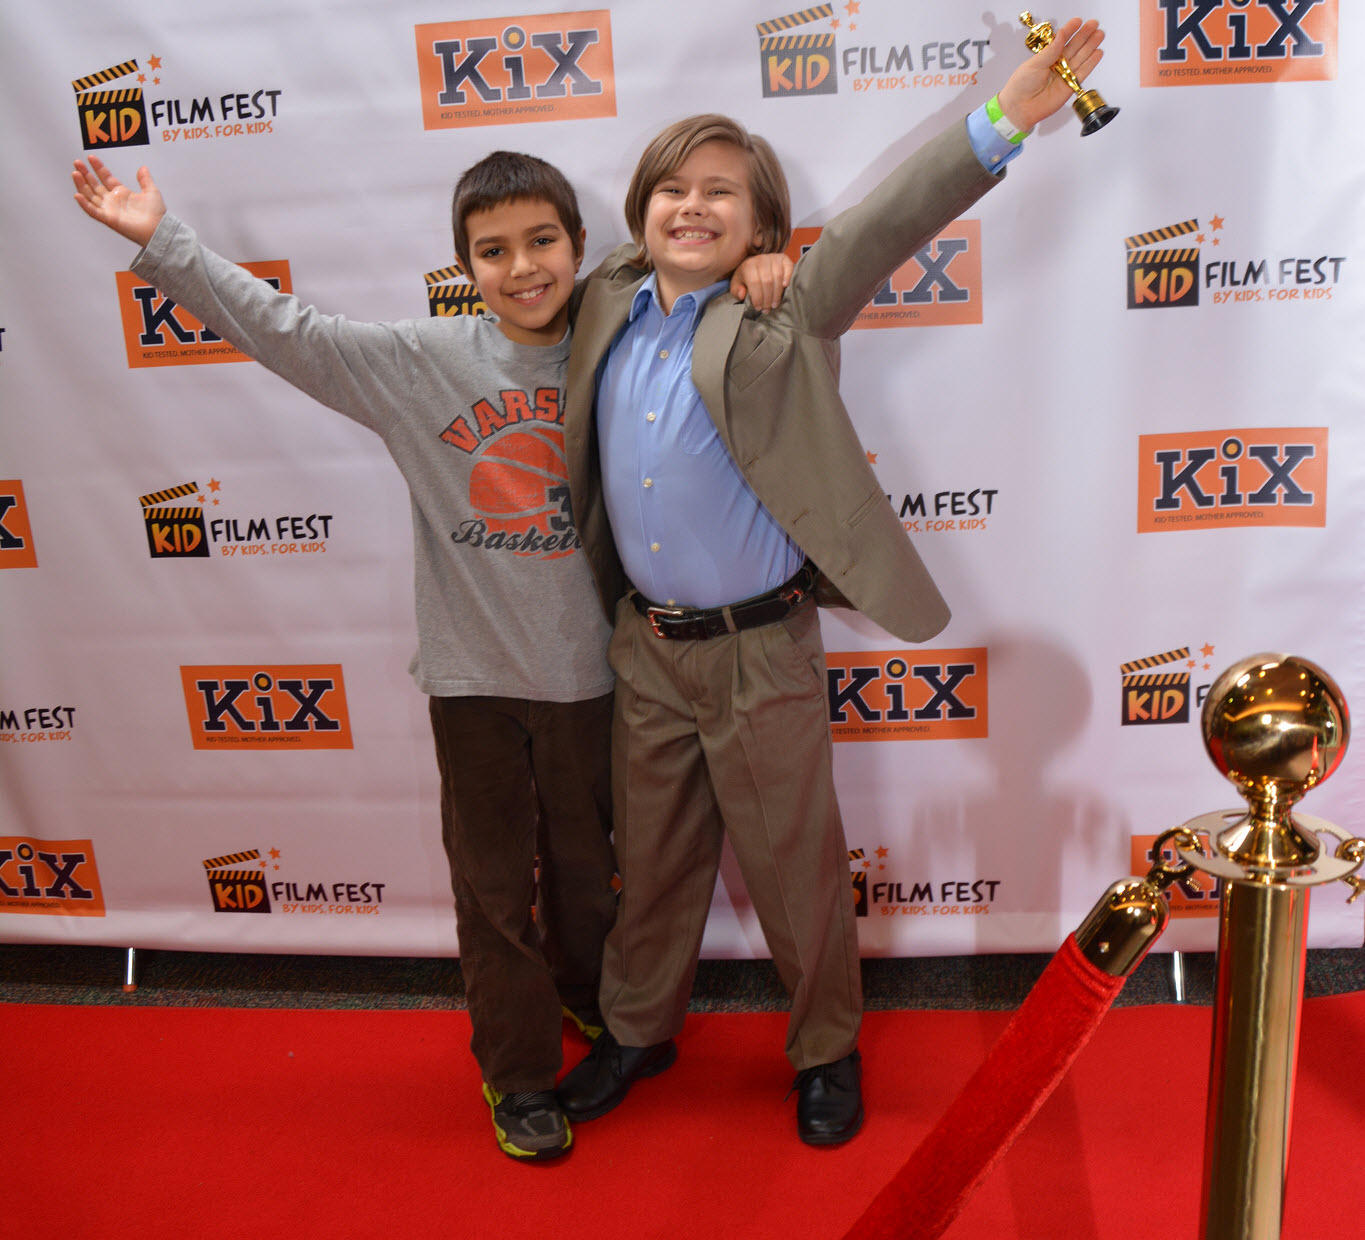 Two young filmmakers celebrating at last year's Kid Film Fest